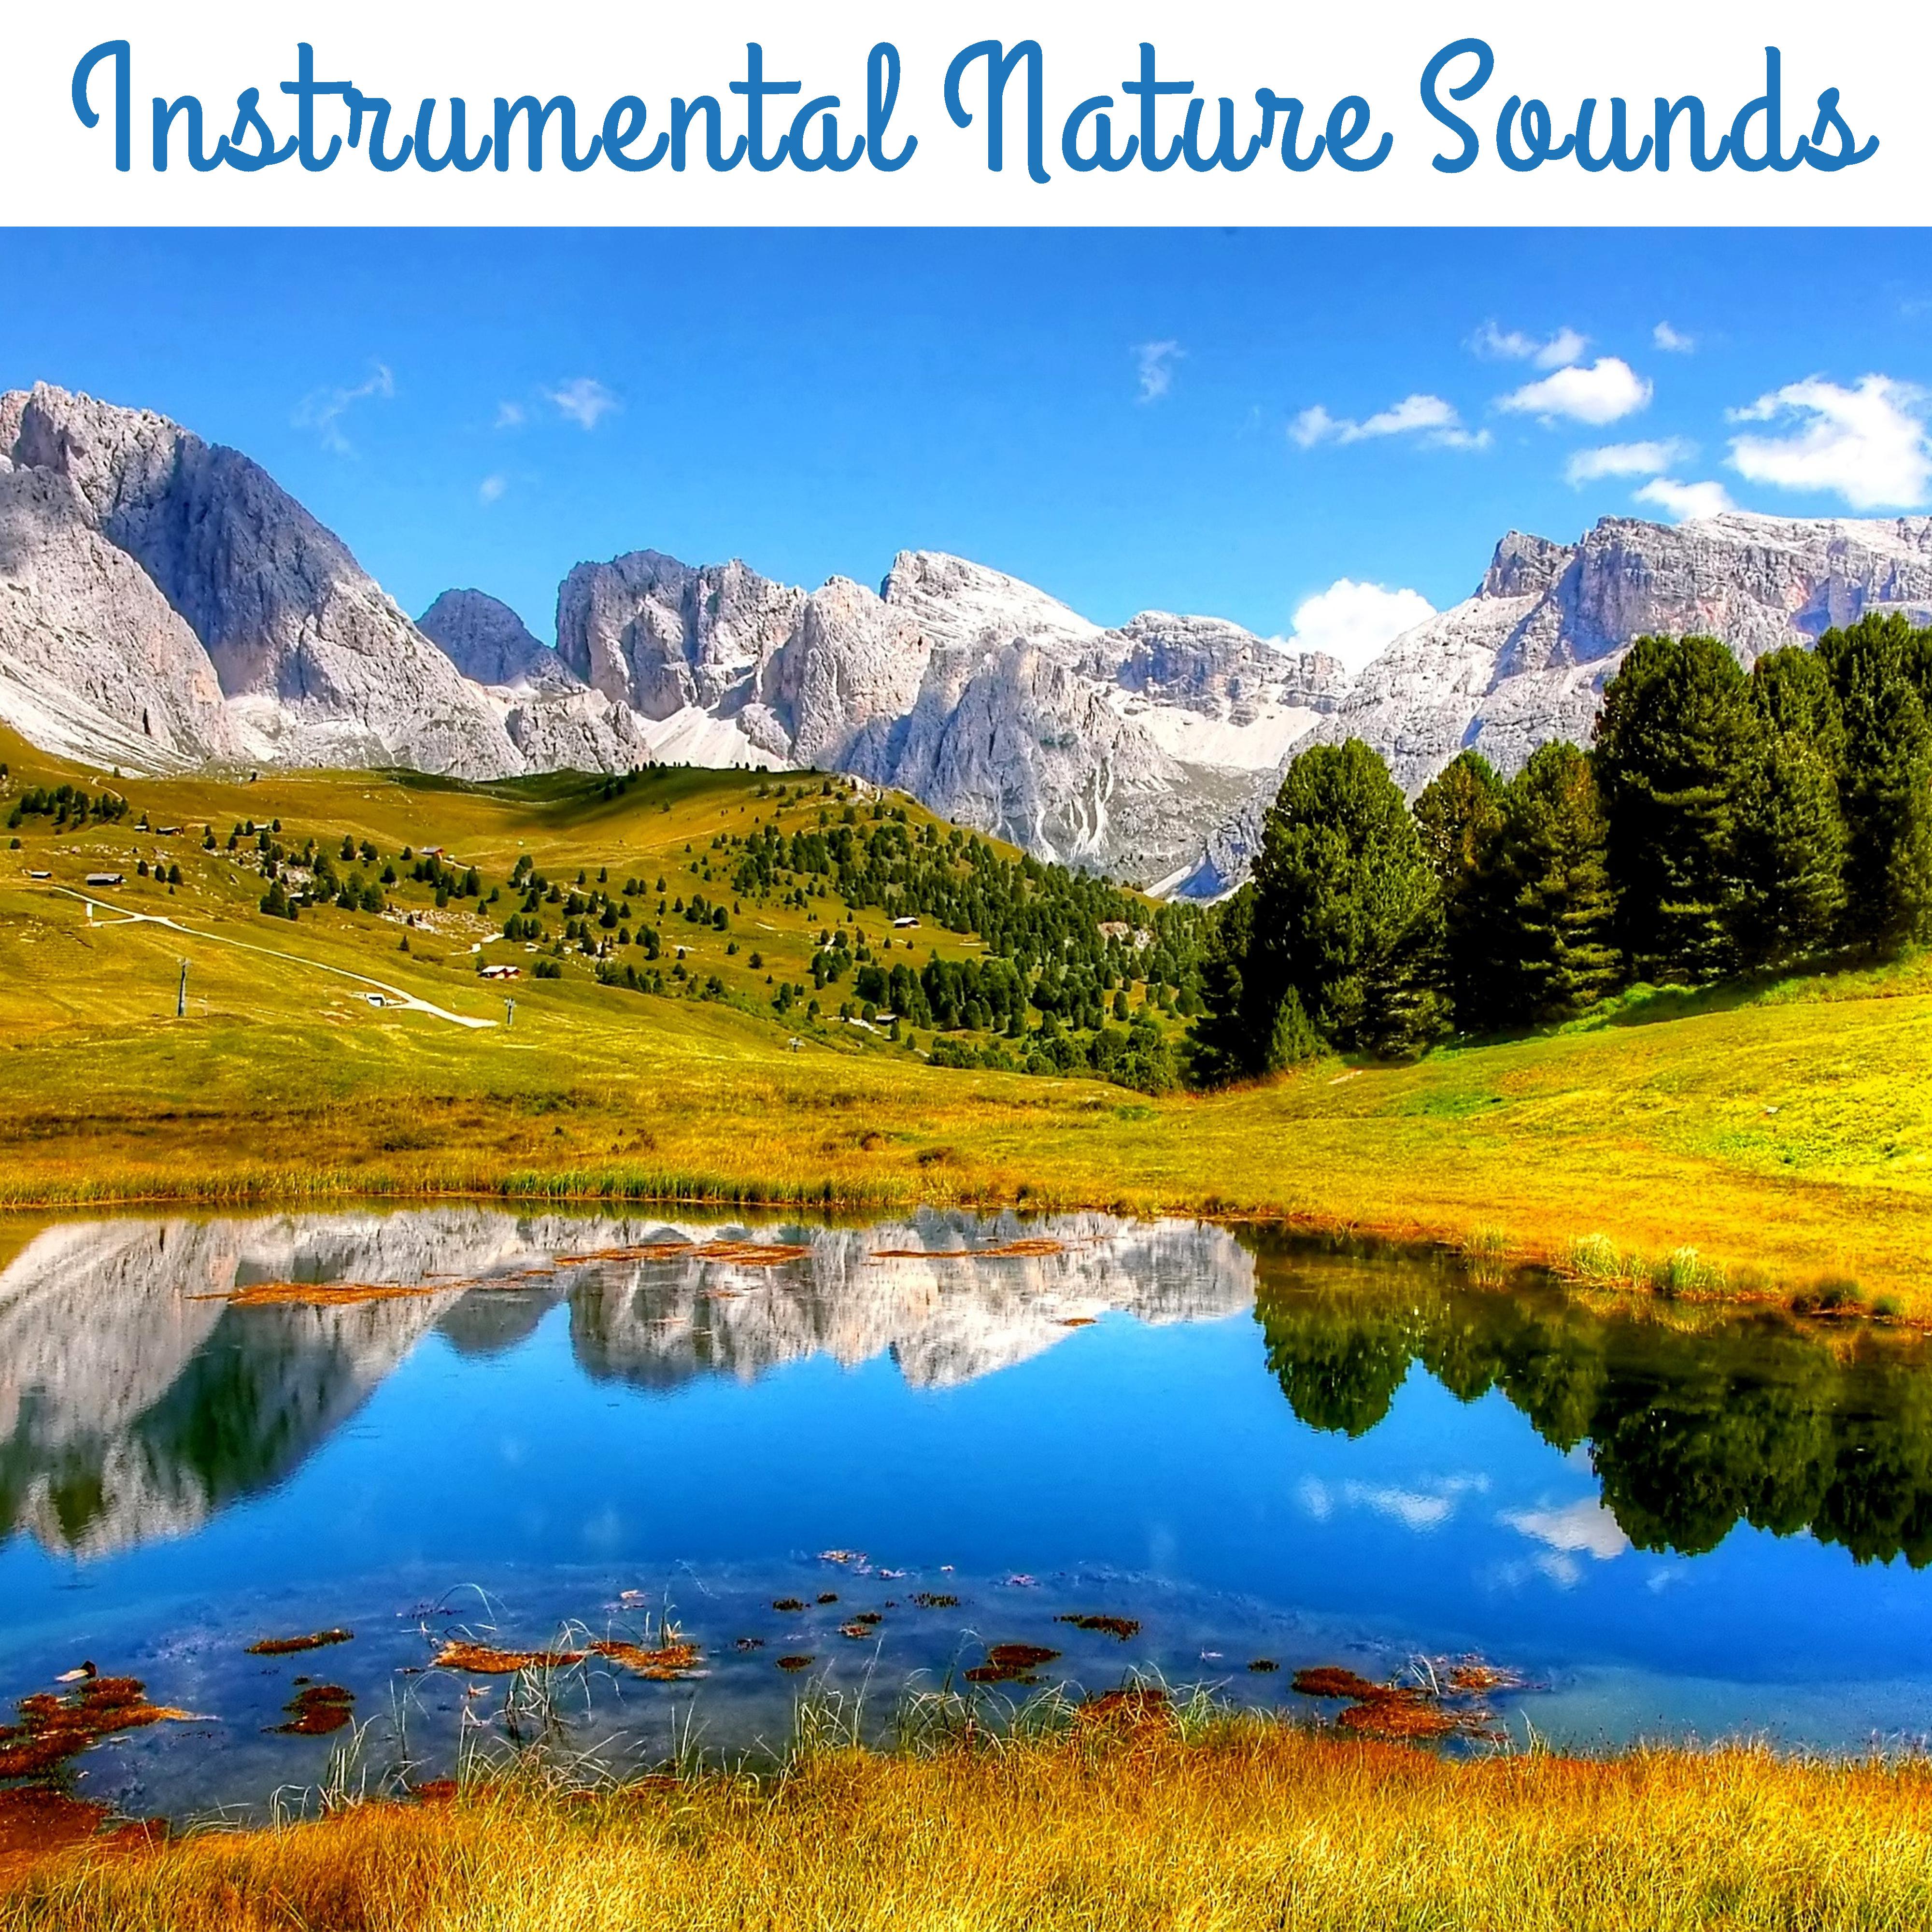 Instrumental Nature Sounds – Nature Healing Touch, Easy Listening, Peaceful Waves, Stress Relief, Inner Calmness